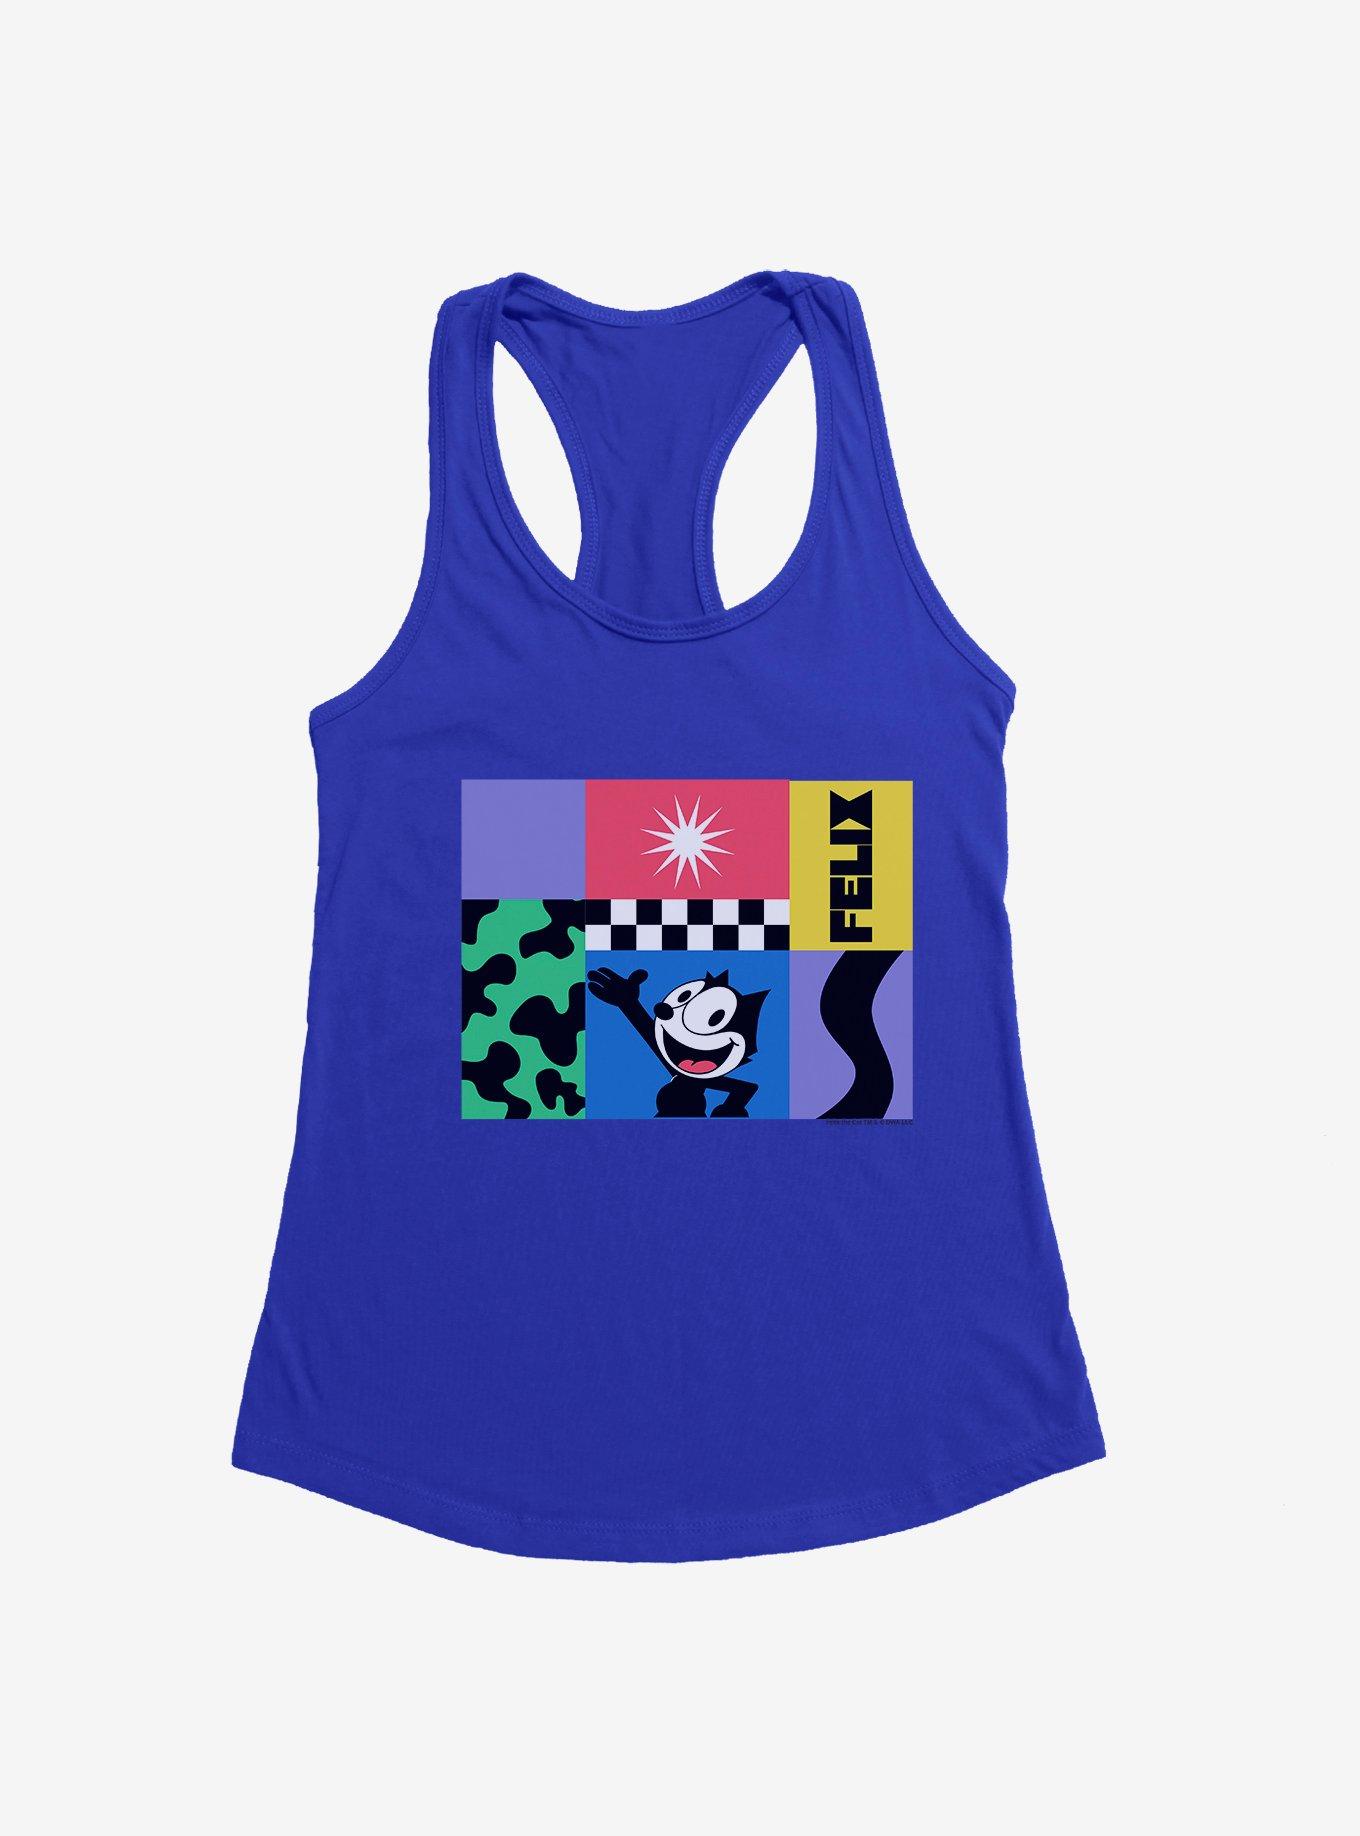 Felix The Cat 90s Graphic Collage Girls Tank